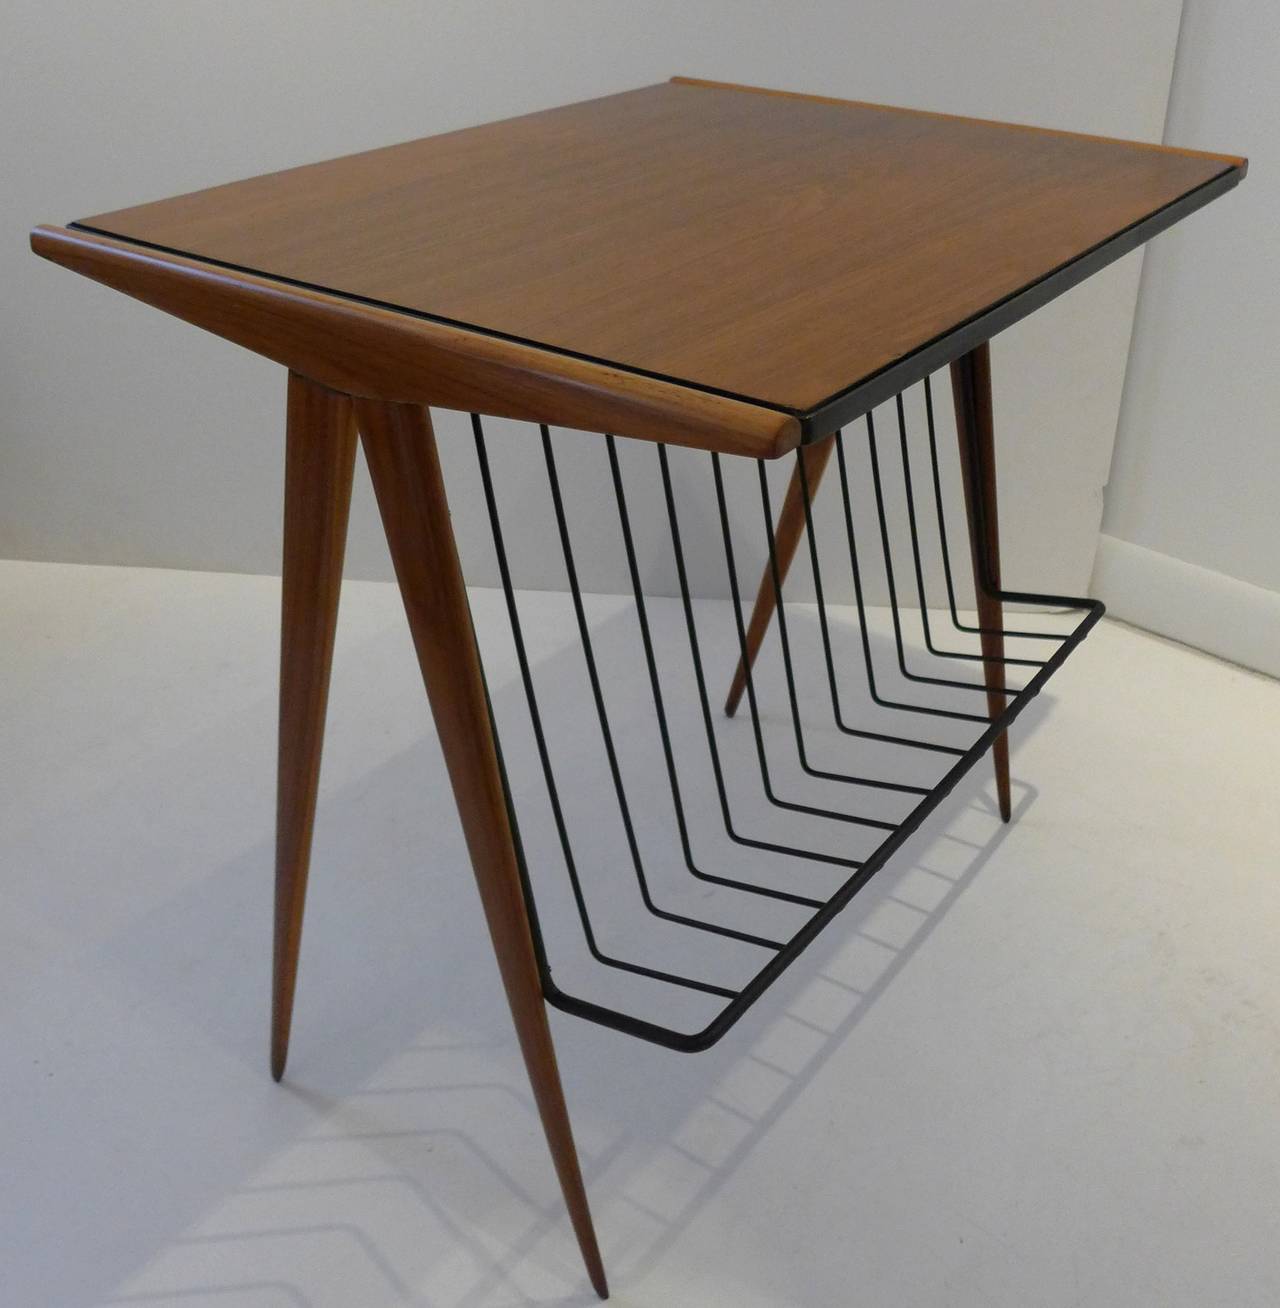 A seldom-seen Mid-Century magazine table in walnut by Arthur Umanoff. The wrought iron magazine holder extends into a border around the top, to which is fastened the compass legs. Manufactured by Post Modern Ltd, circa 1954 for distribution by The